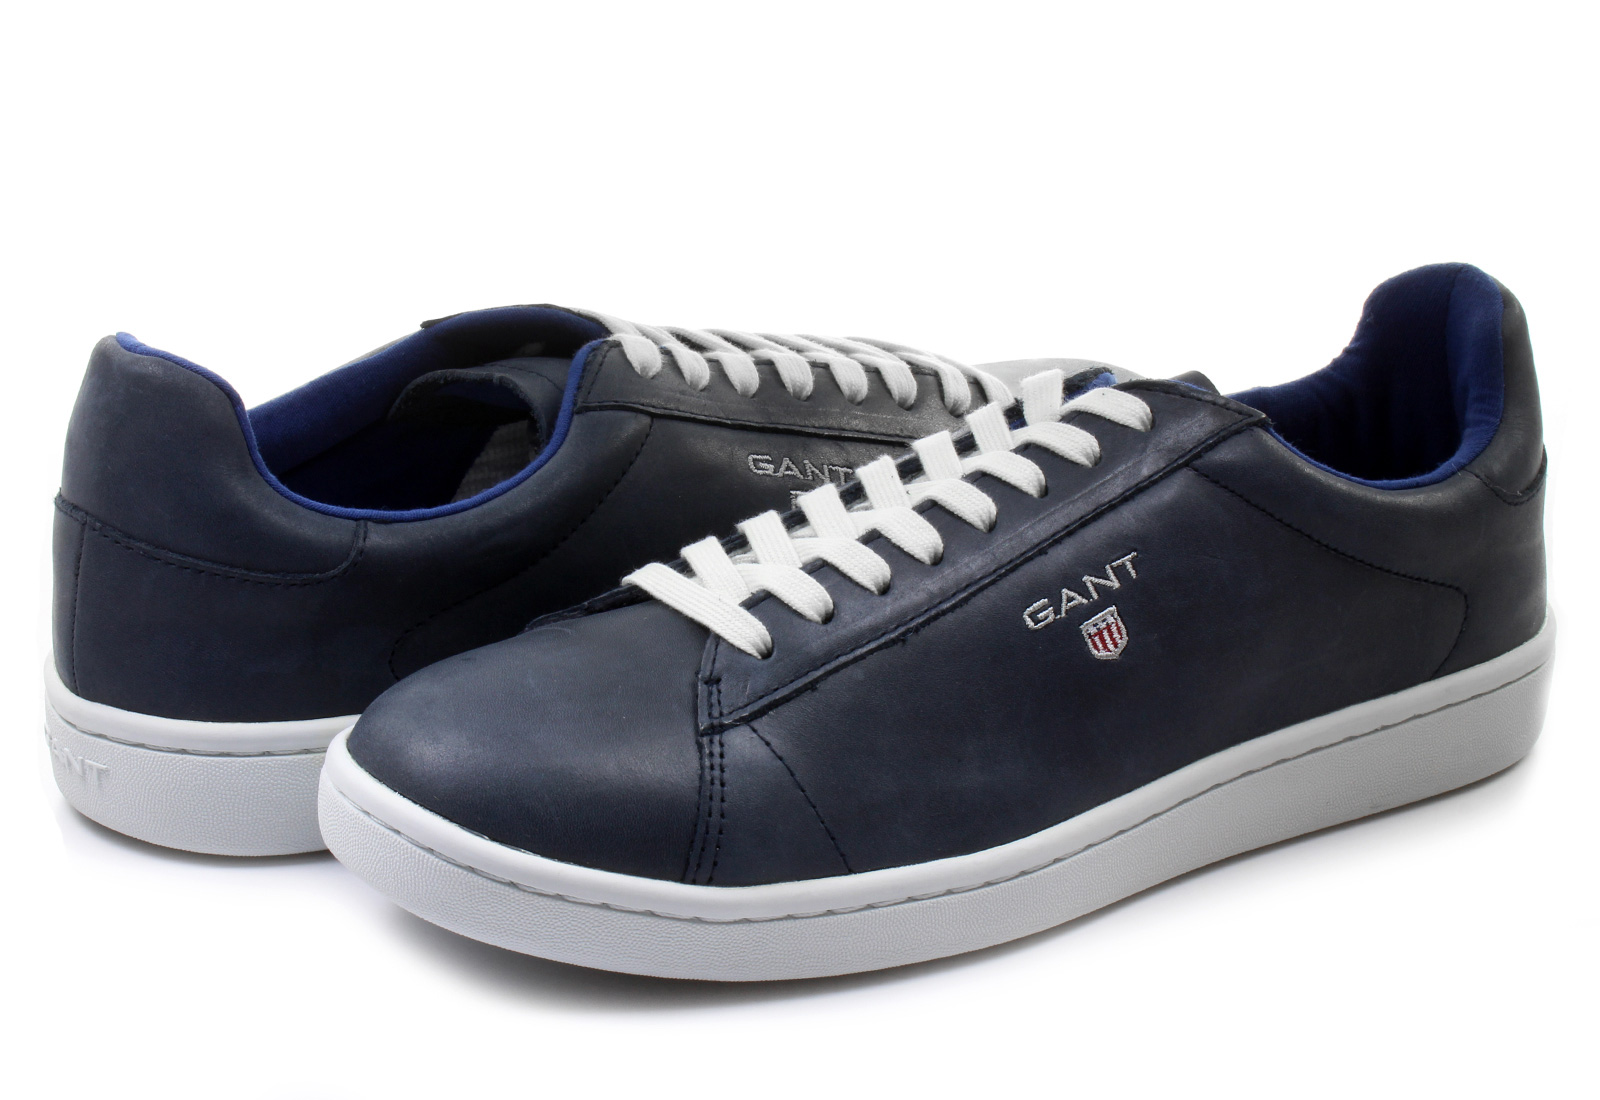 Gant Shoes - Ace - 10631580-G65 - Online shop for sneakers, shoes and boots